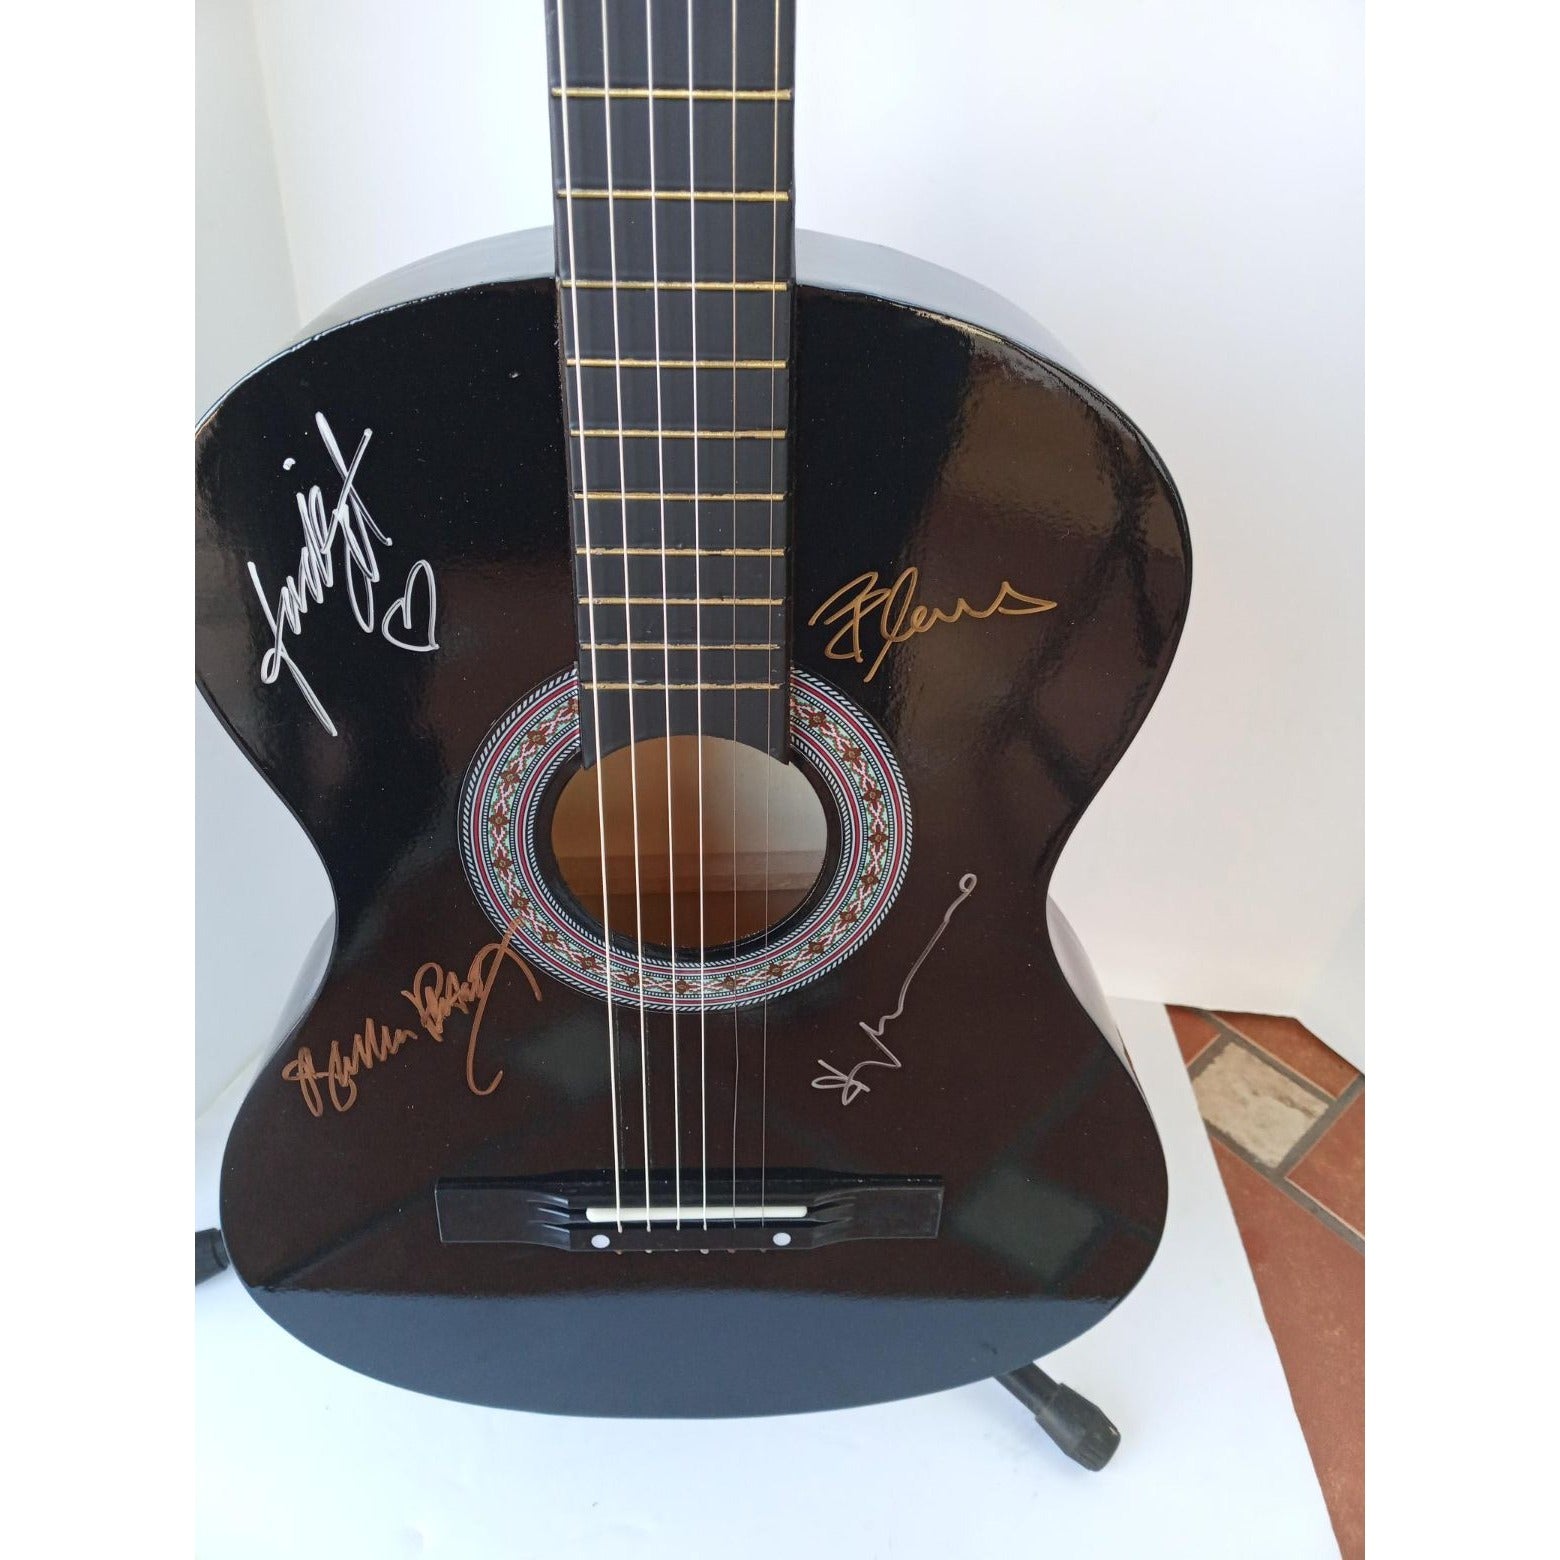 ABBA Anni-Frid Lyngstad Benny Anderson Bjorn Ulvaeus Agnetha Fältskog Zenni acoustic guitar signed with proof